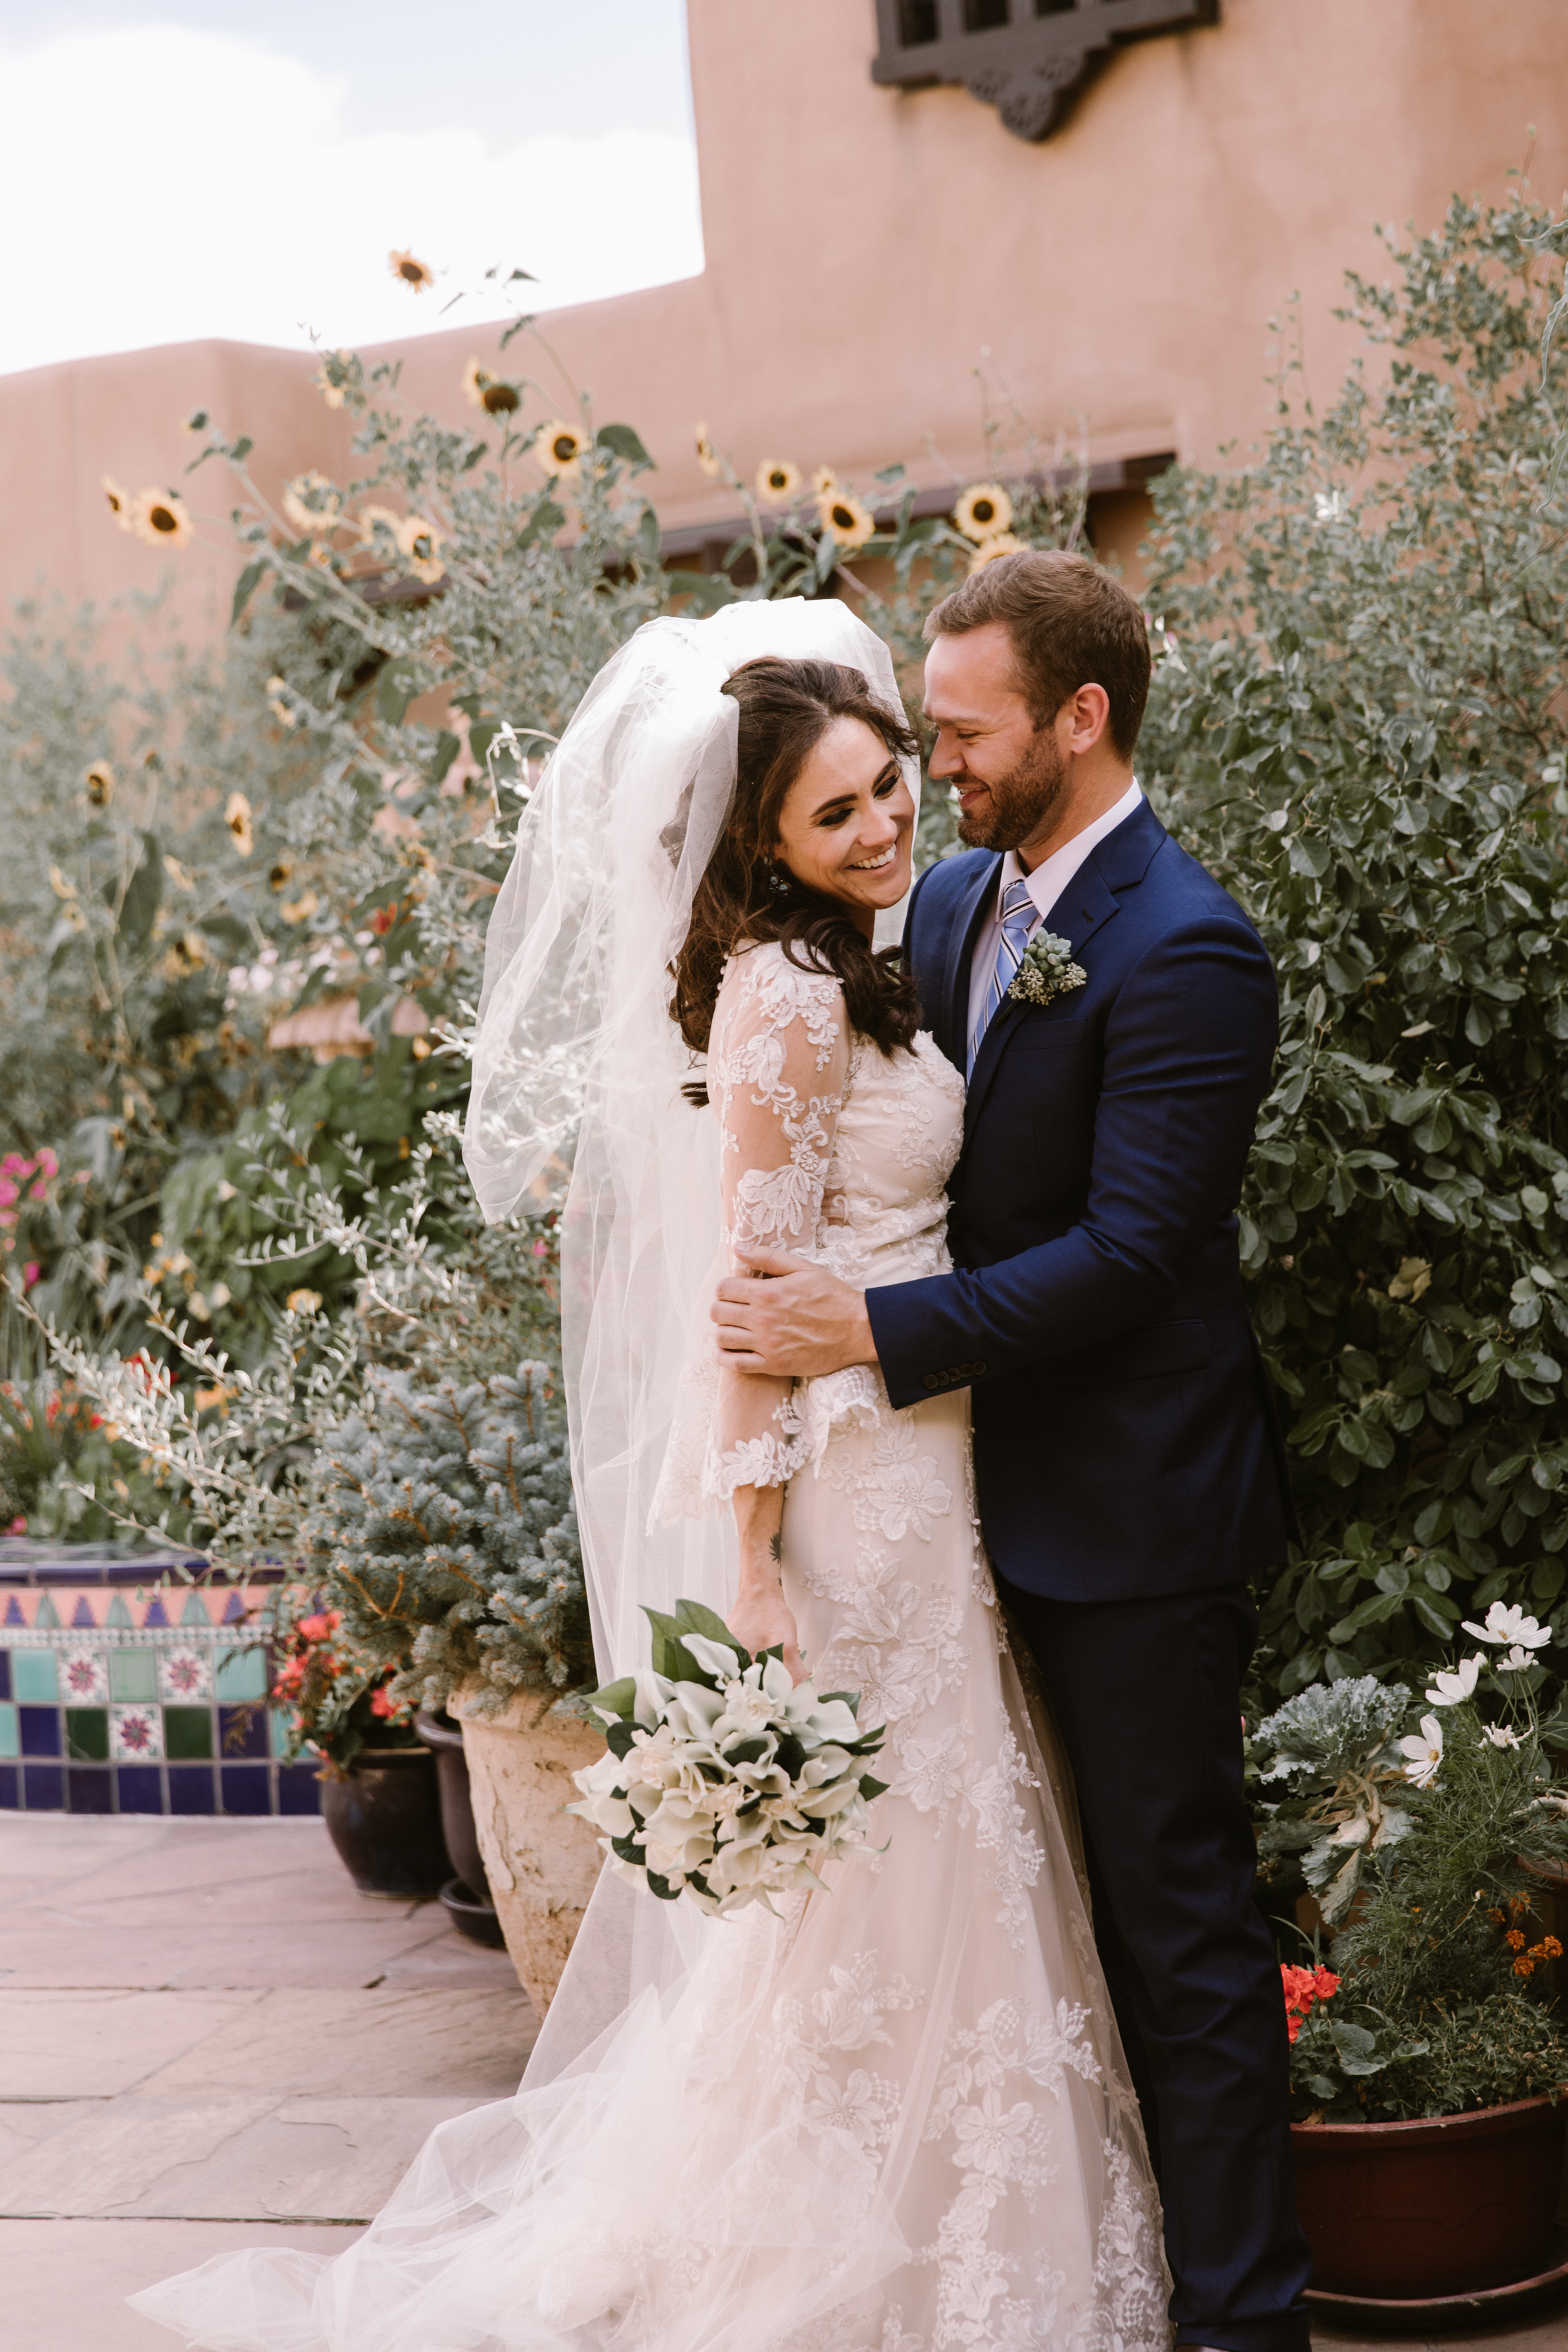 New Mexico wedding Santa Fe planning La Fonda gown suit inspiration design floral bouquet lace photography romantic styled local perfect wedding guide sunflowers first look couple engagement ceremony